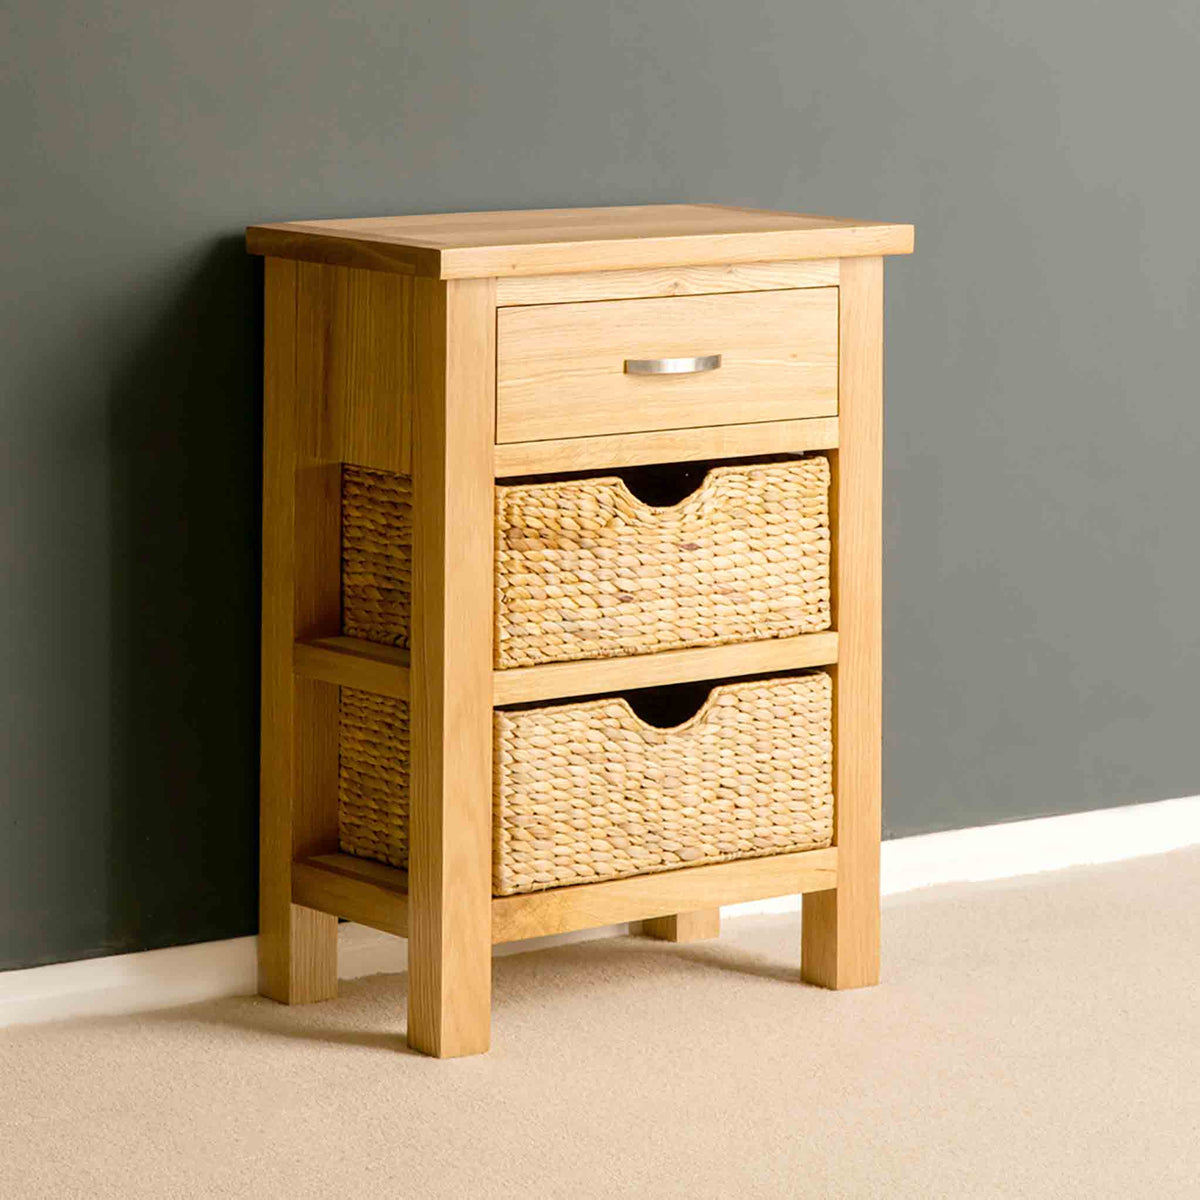 London Oak Hall Table with Baskets - Side View